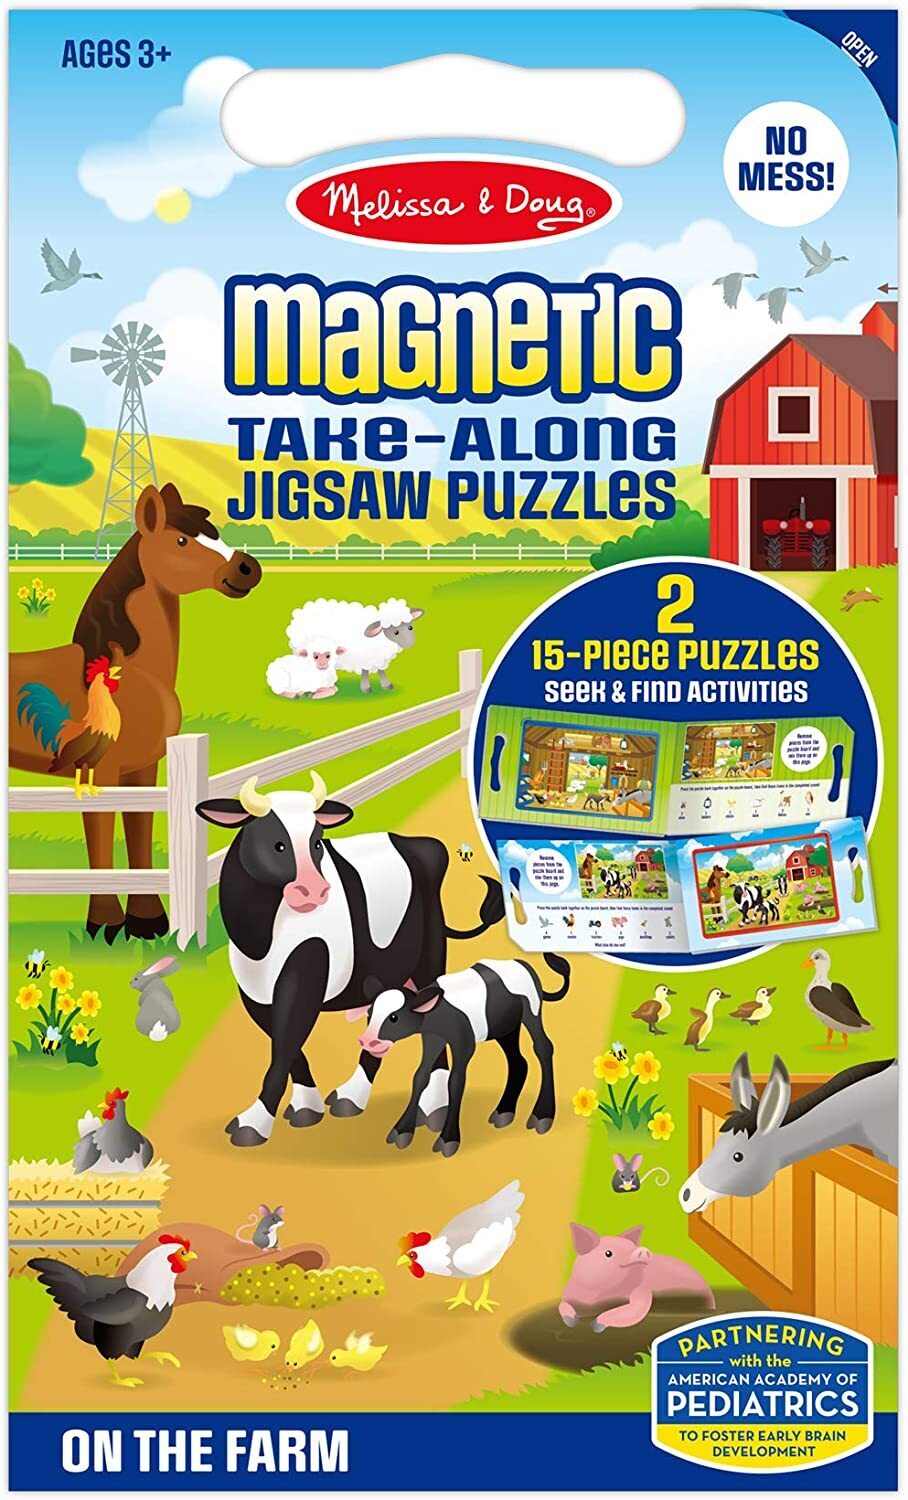 M&D32830 Magnetic Take Along Jigsaw Puzzles - On The Farm